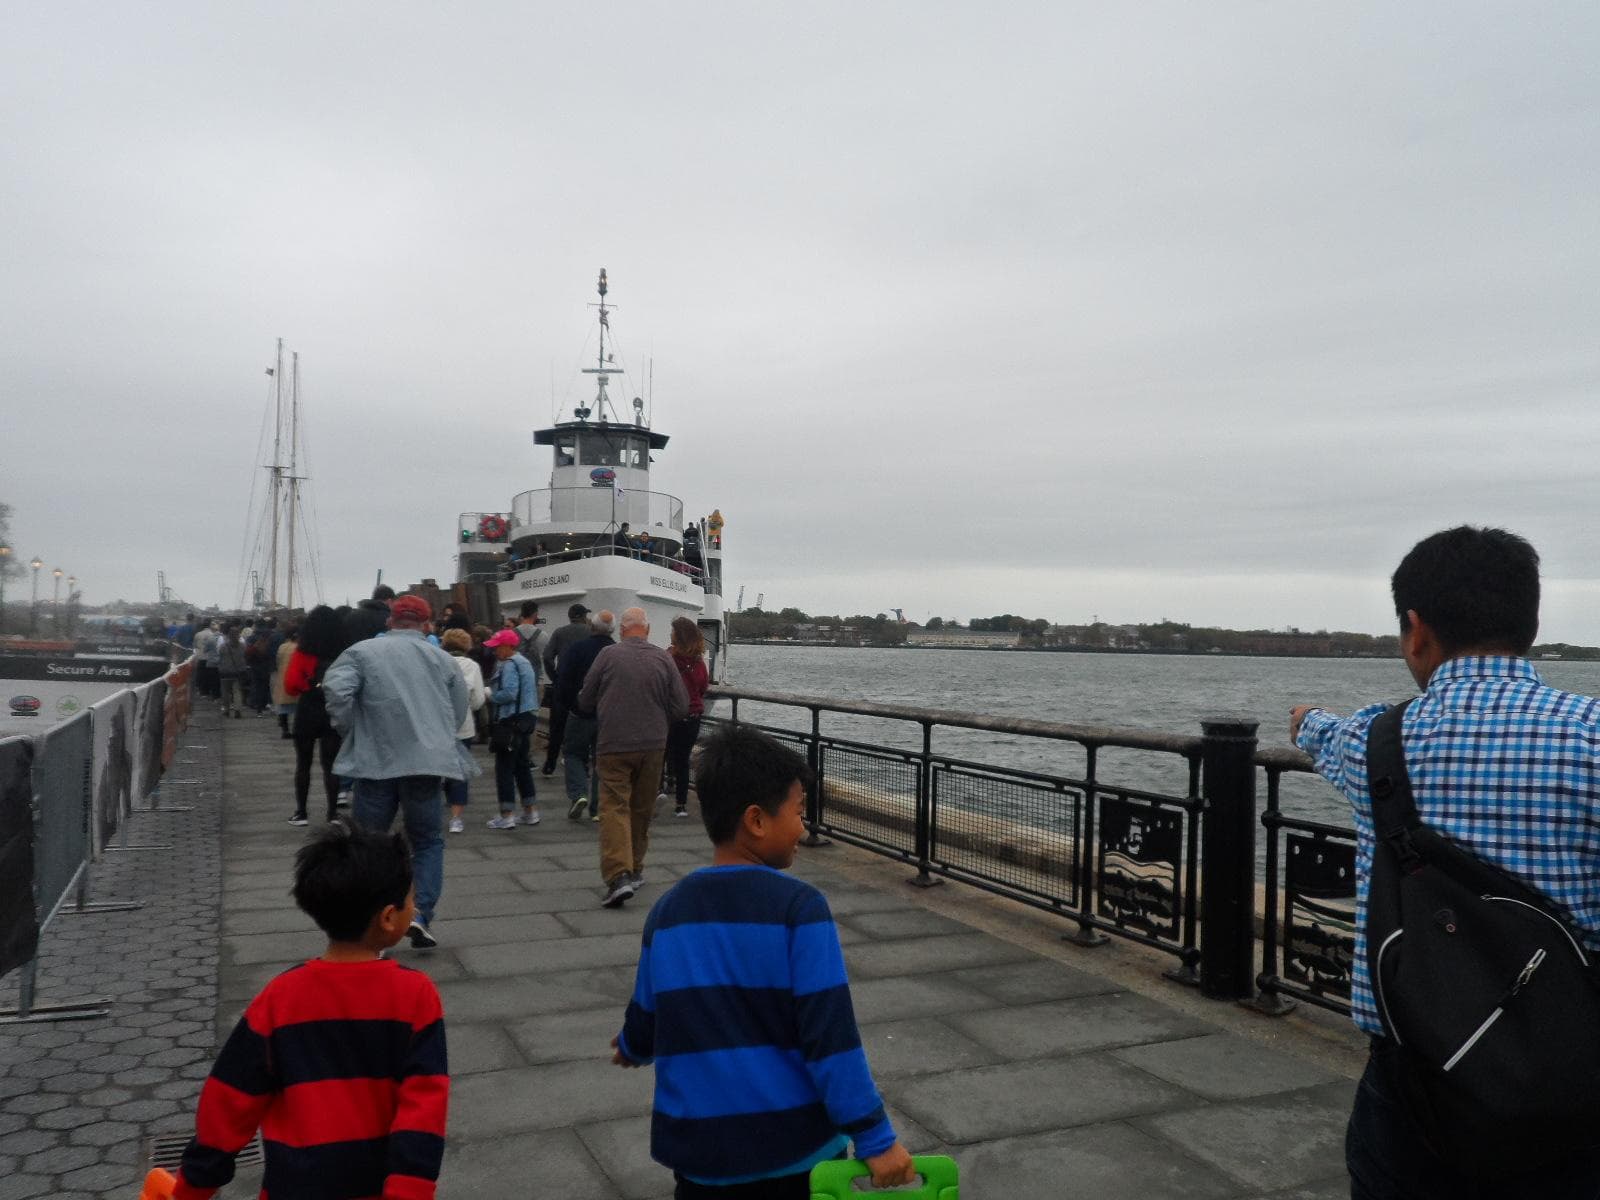 Boarding the ferry to Liberty Island; photo credit: Katherine Michel